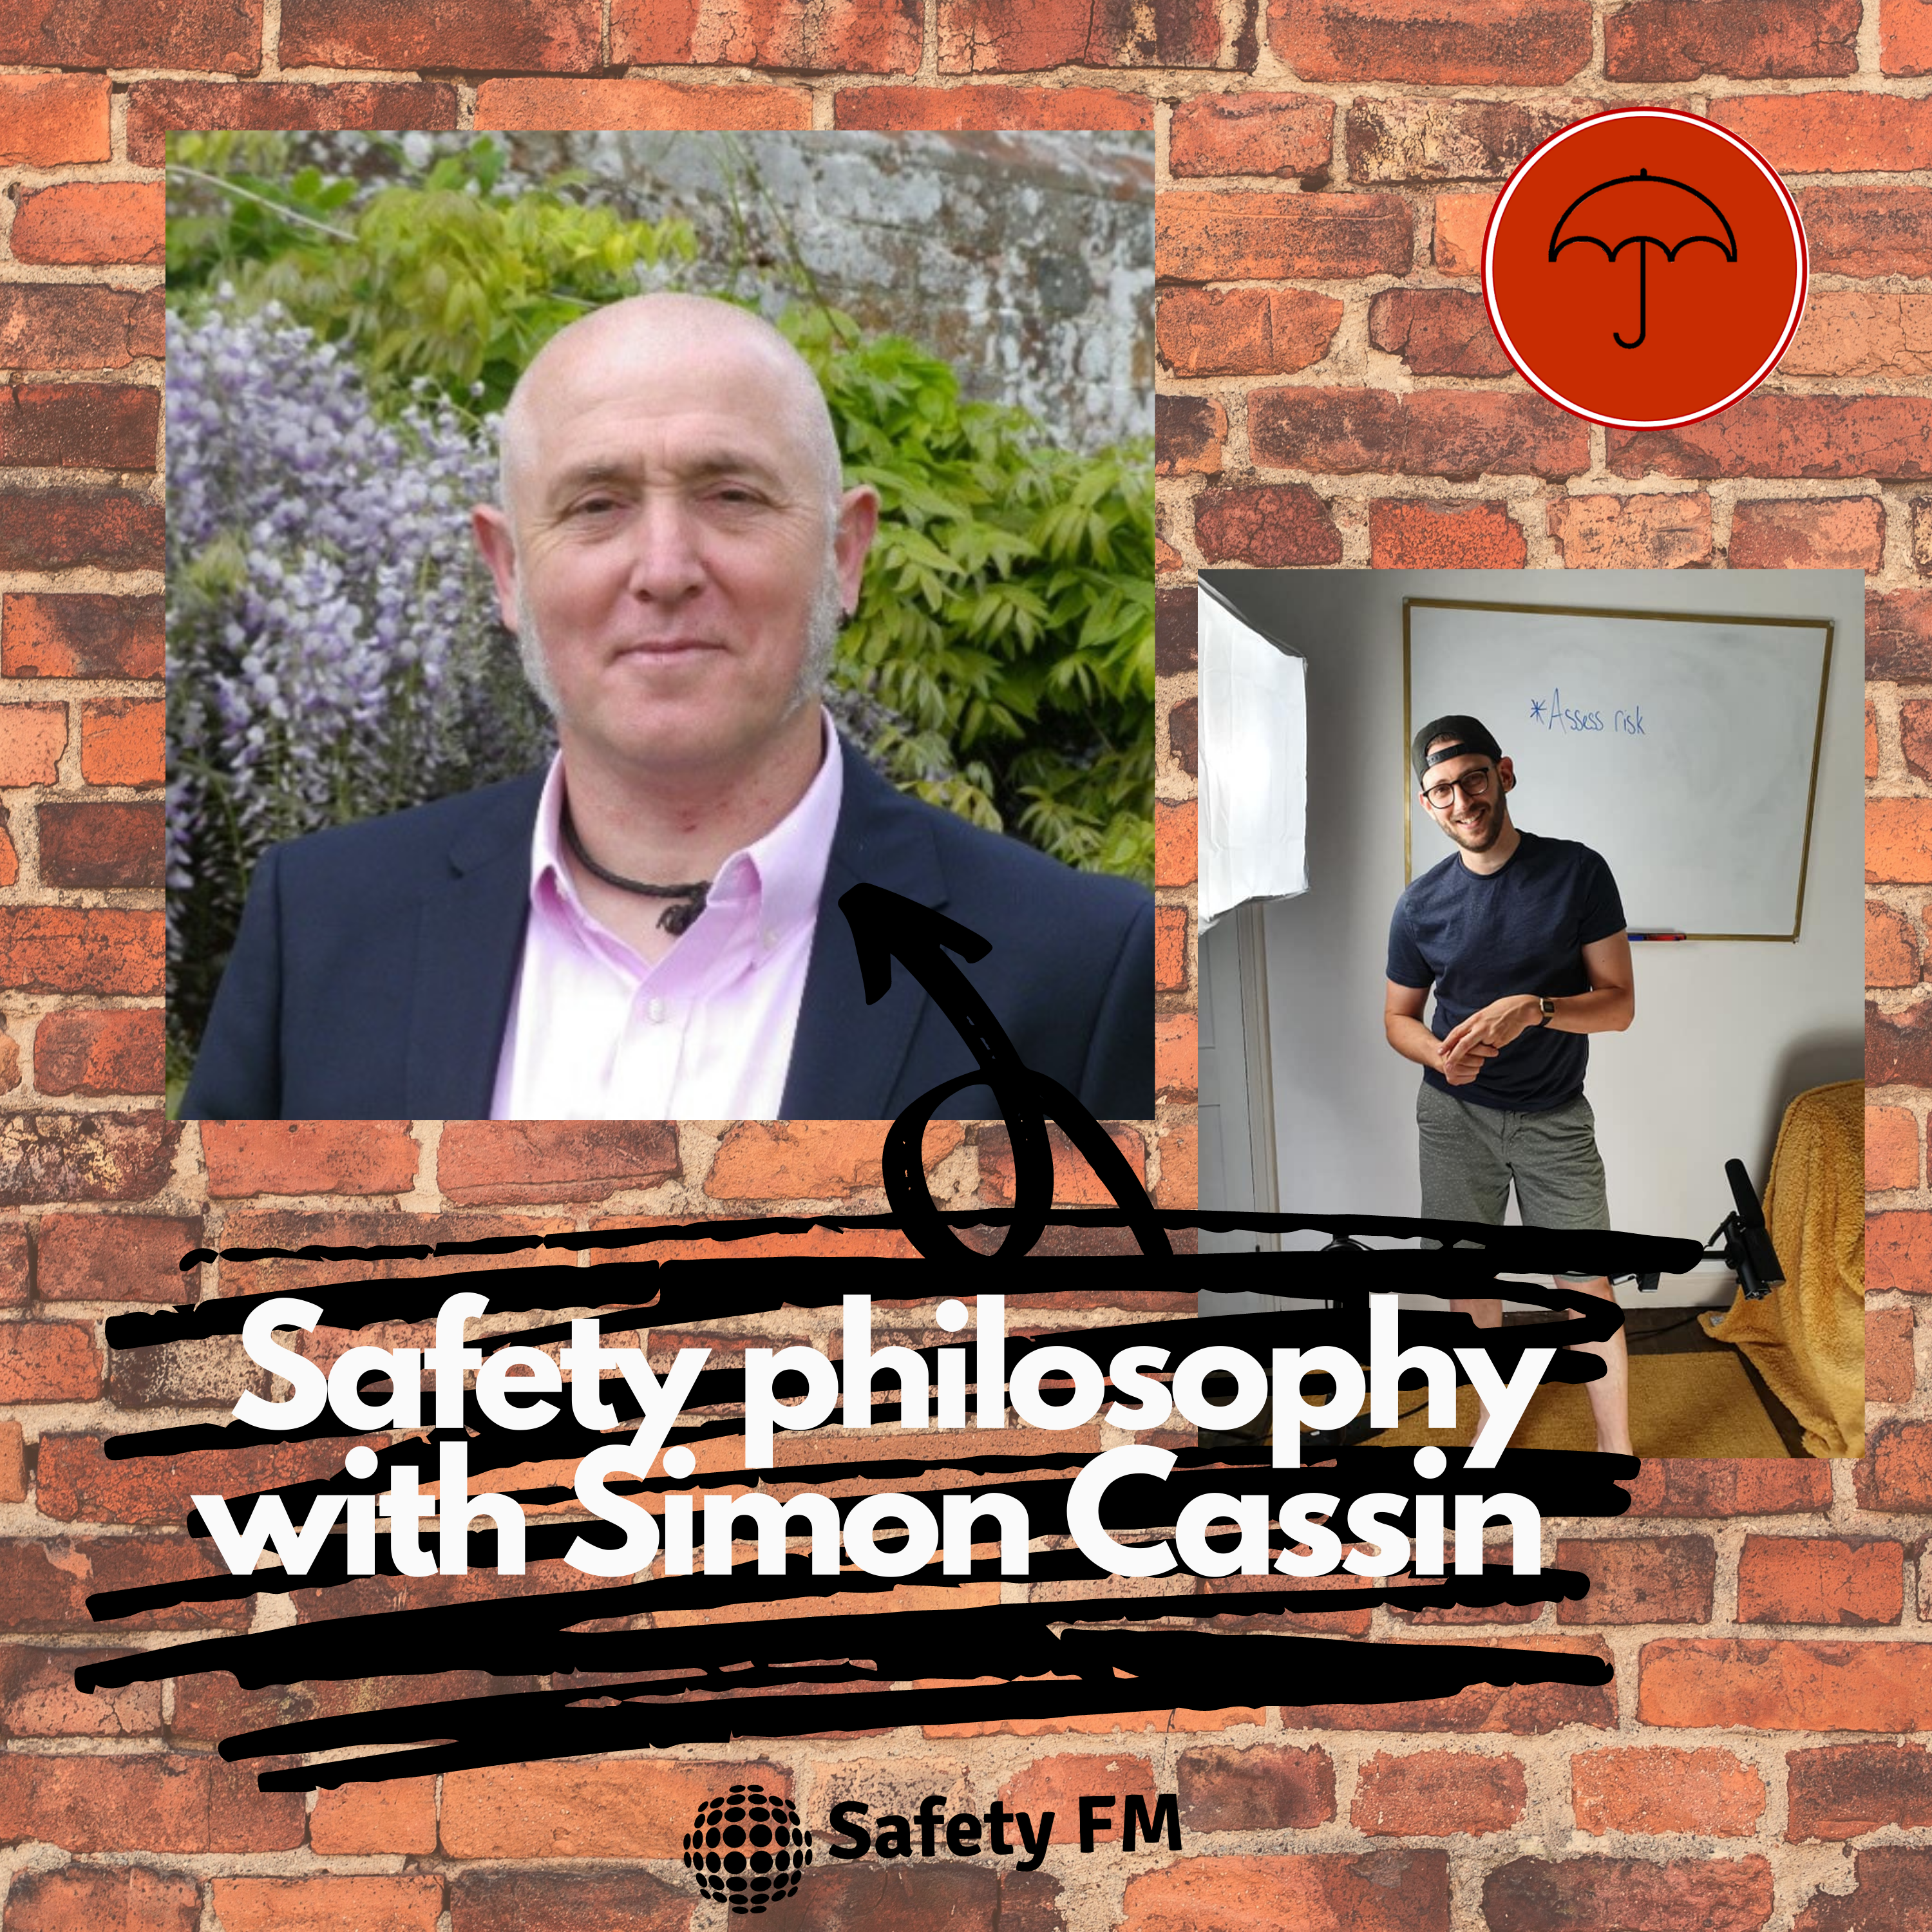 Safety philosophy with Simon Cassin